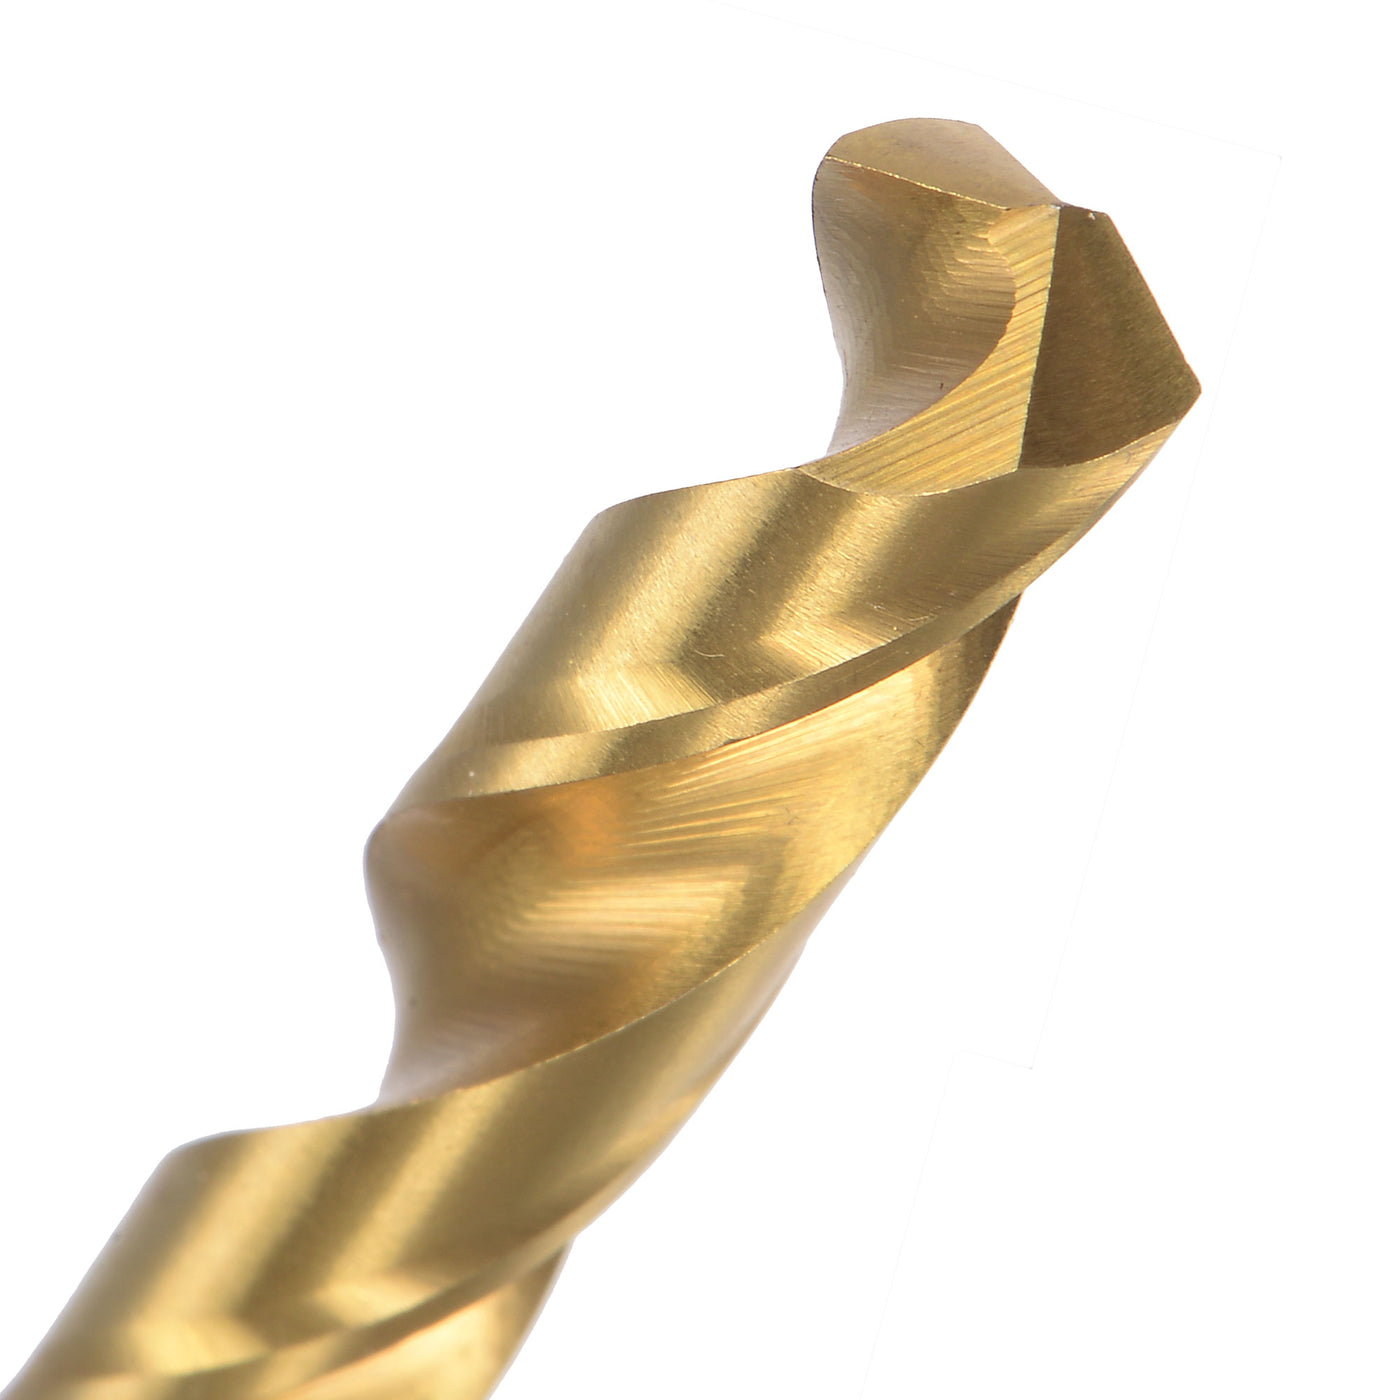 uxcell Uxcell High Speed Steel Twist Drill Bit 7.7mm Fully Ground Titanium Coated